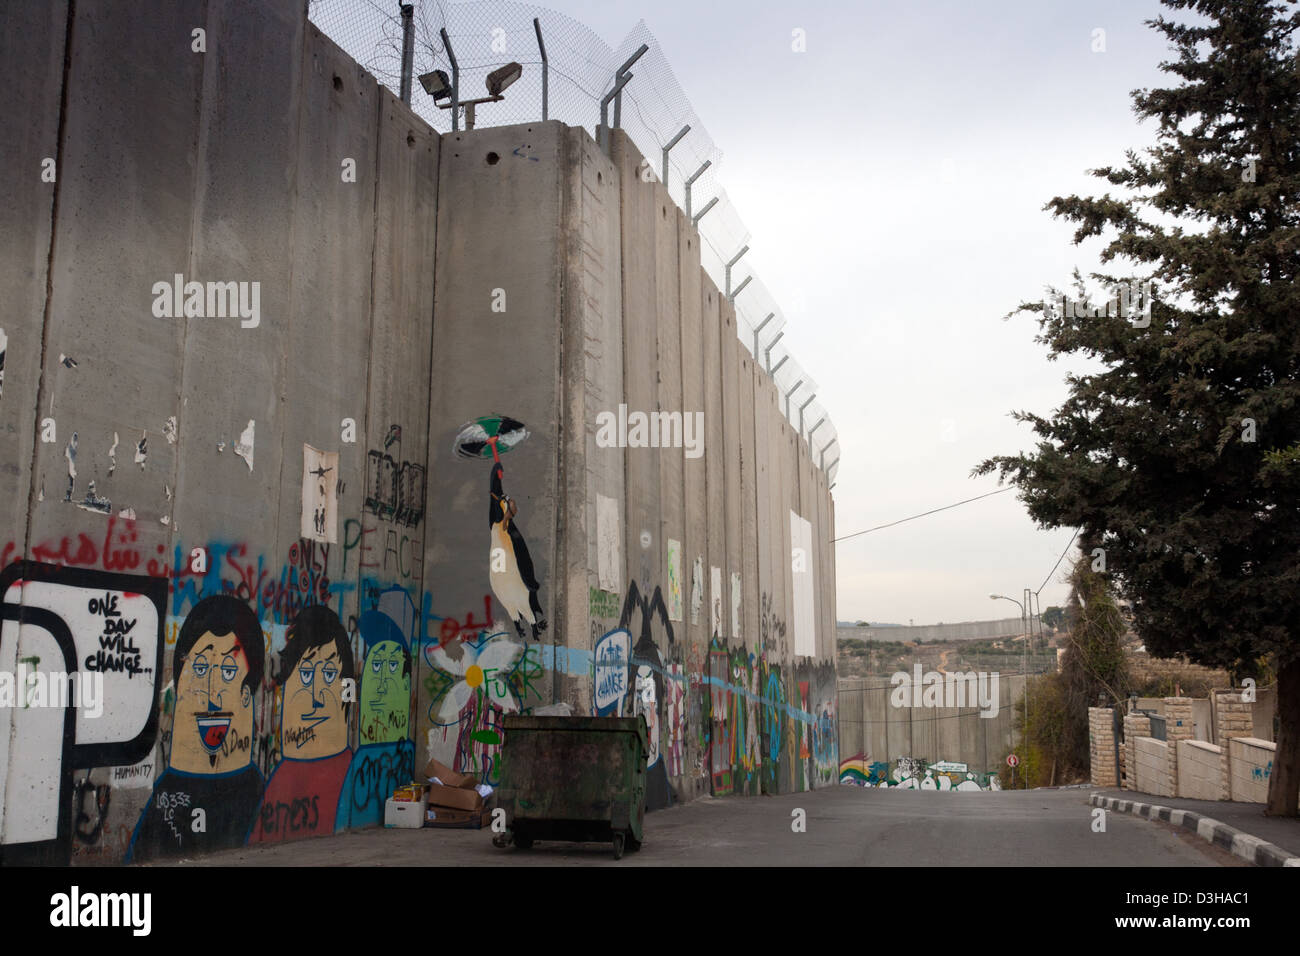 Palestinian side of the Israeli West Bank barrier Stock Photo